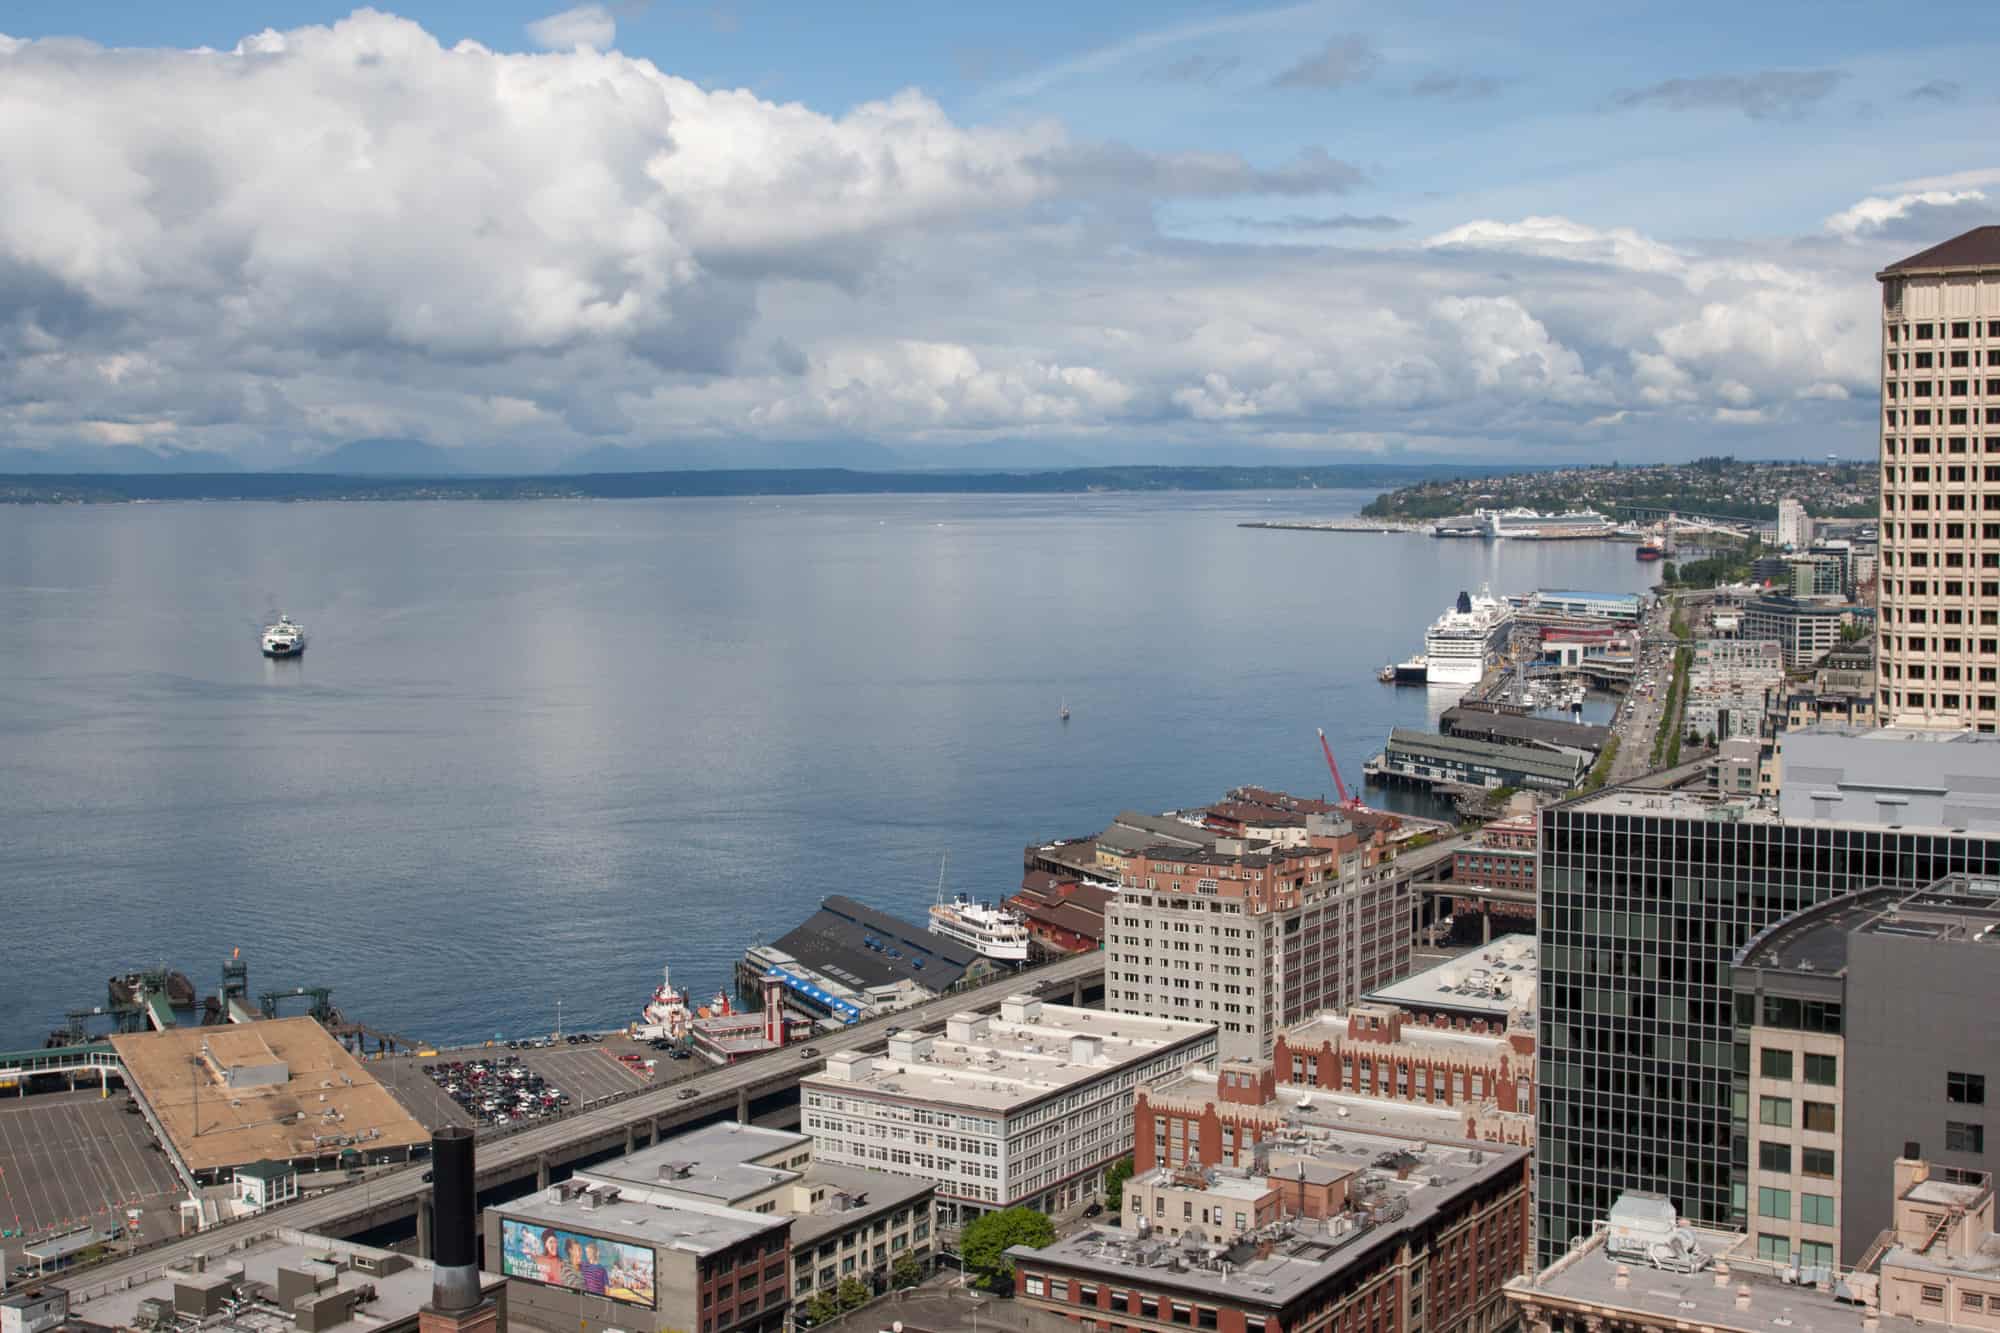 view of puget sound with the ferry out in the water and the buildings along the shore